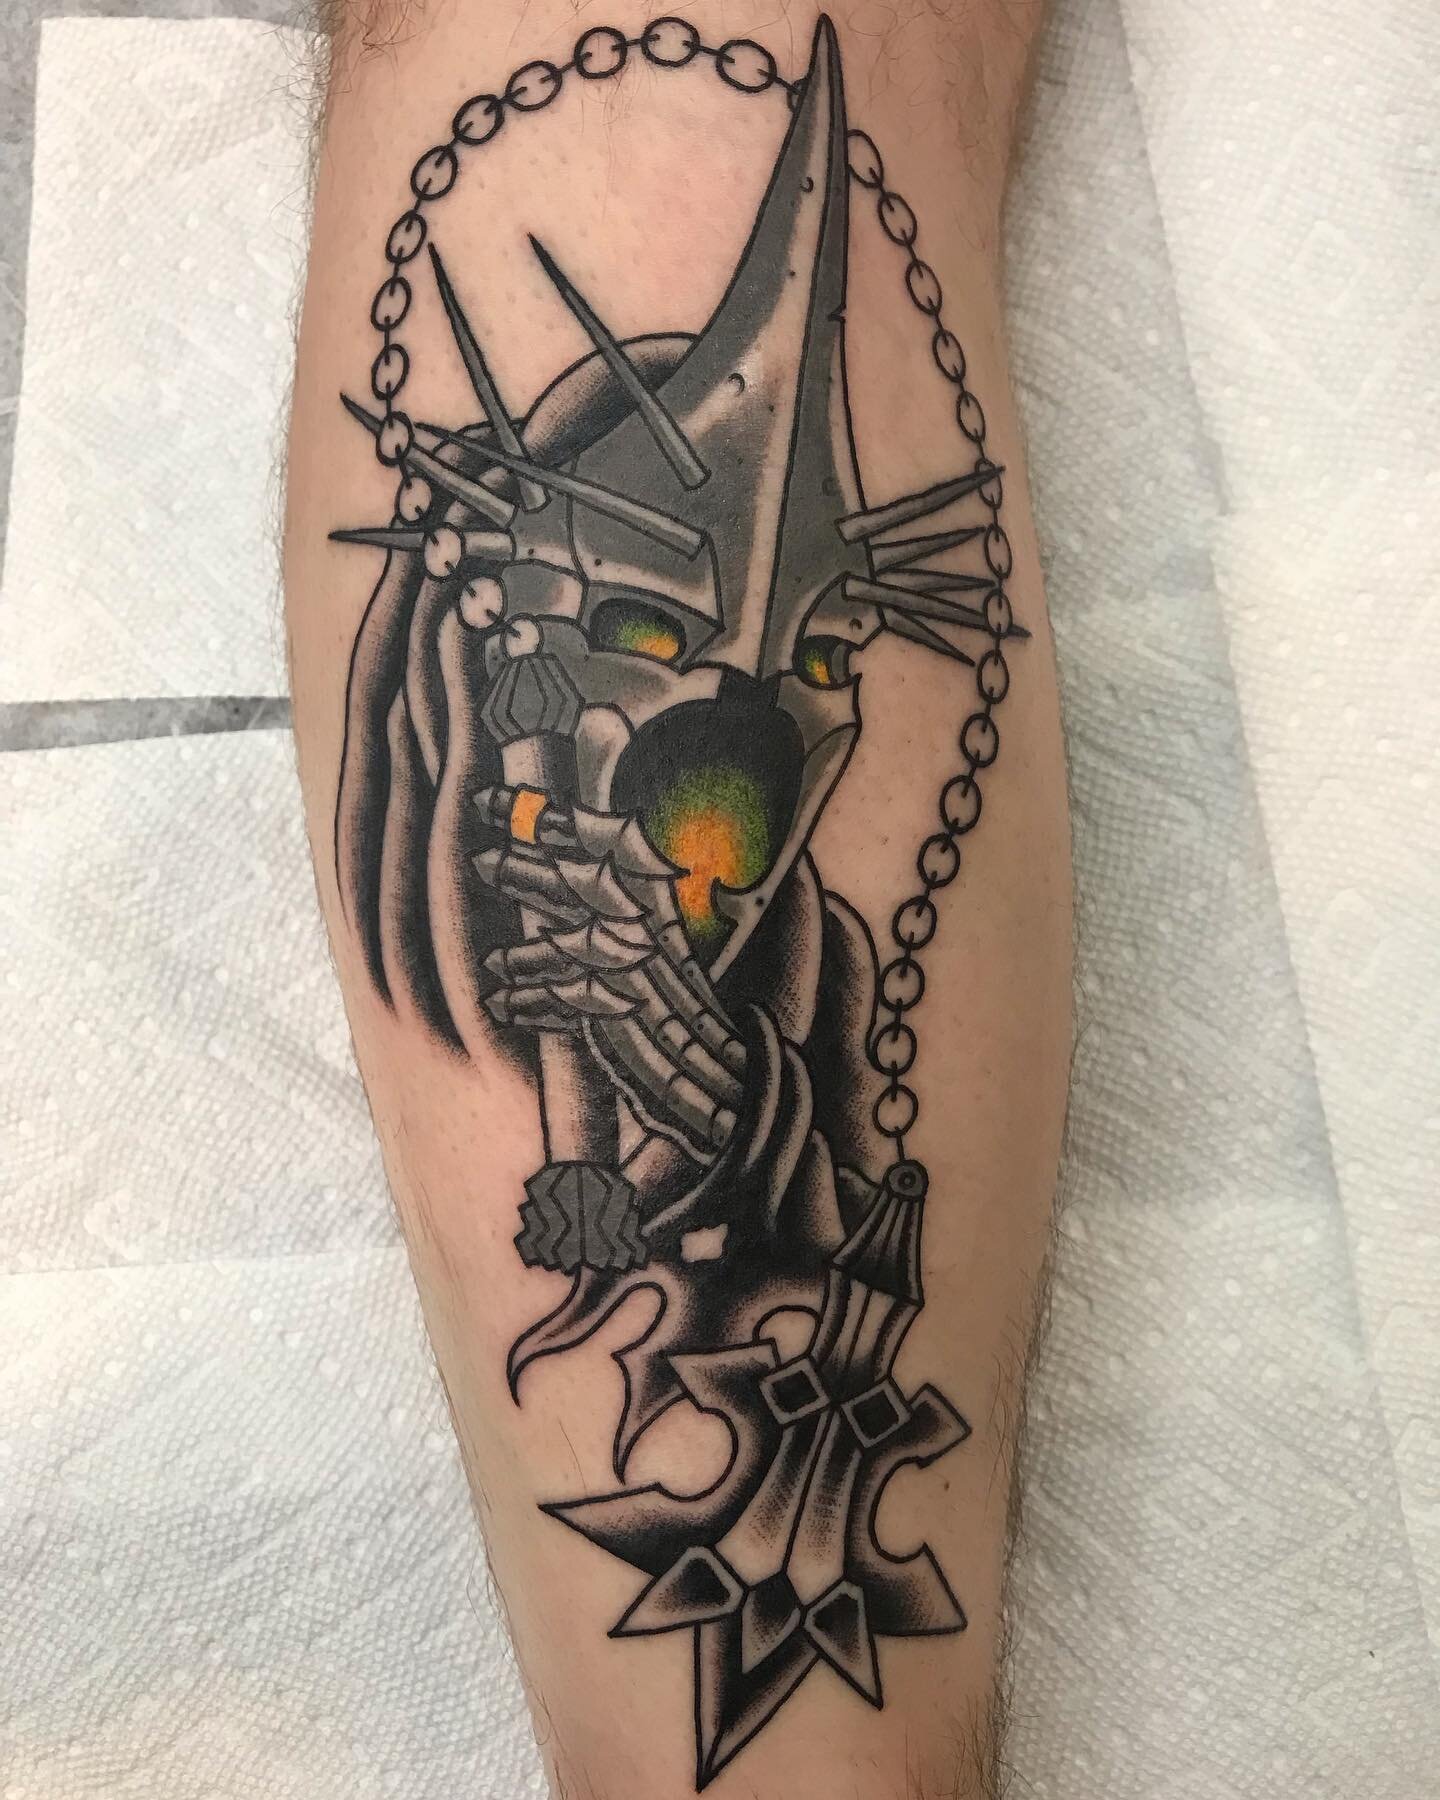 Witch king for my homie @s.cary_kitchen thanks again brother 

.
.
.
.
.
#tattoo #tattoos #stl #downtowntattoo #washingtonave #downtownstl #traditionaltattoo #americantraditional #scripttattoo #script #japanese #japanesetattoo #blackandgrey #blackand